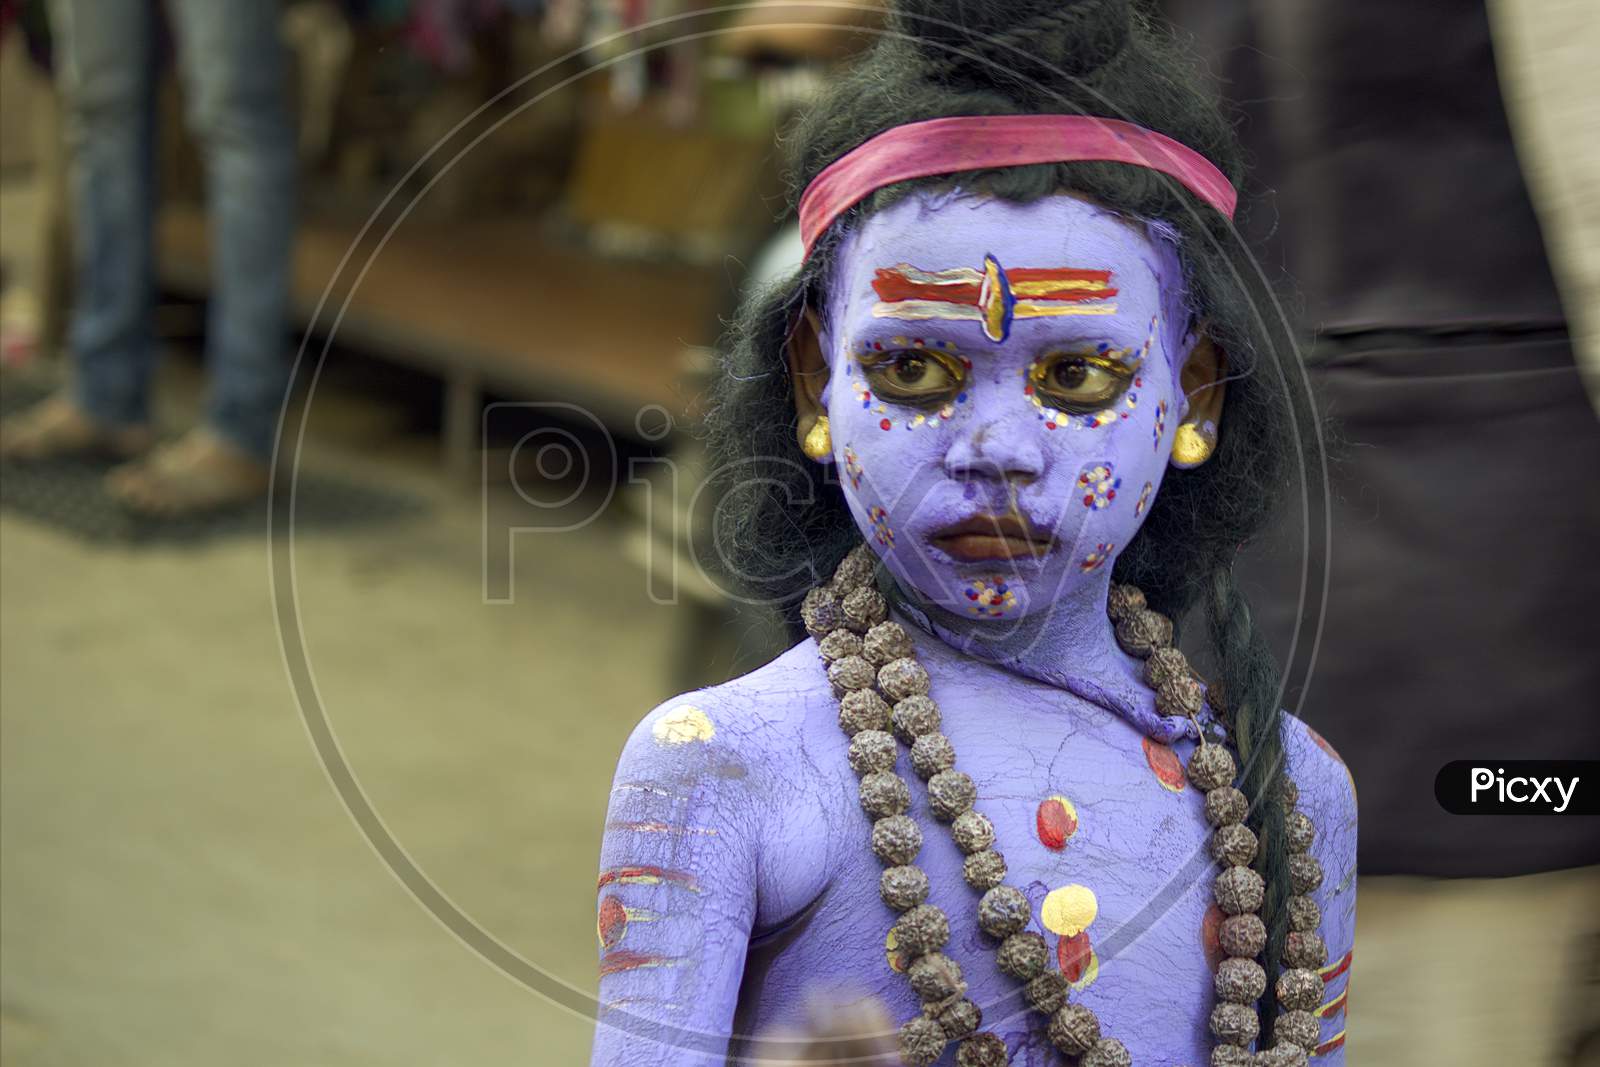 Pushkar, India - November 10, 2016: A Little Kid Boy Dressed Up Or Disguised As God Shiva With Blue Paint All Over In Order To Attract Tourists For A Living During Famous Camel Pushkar Mela Festival.